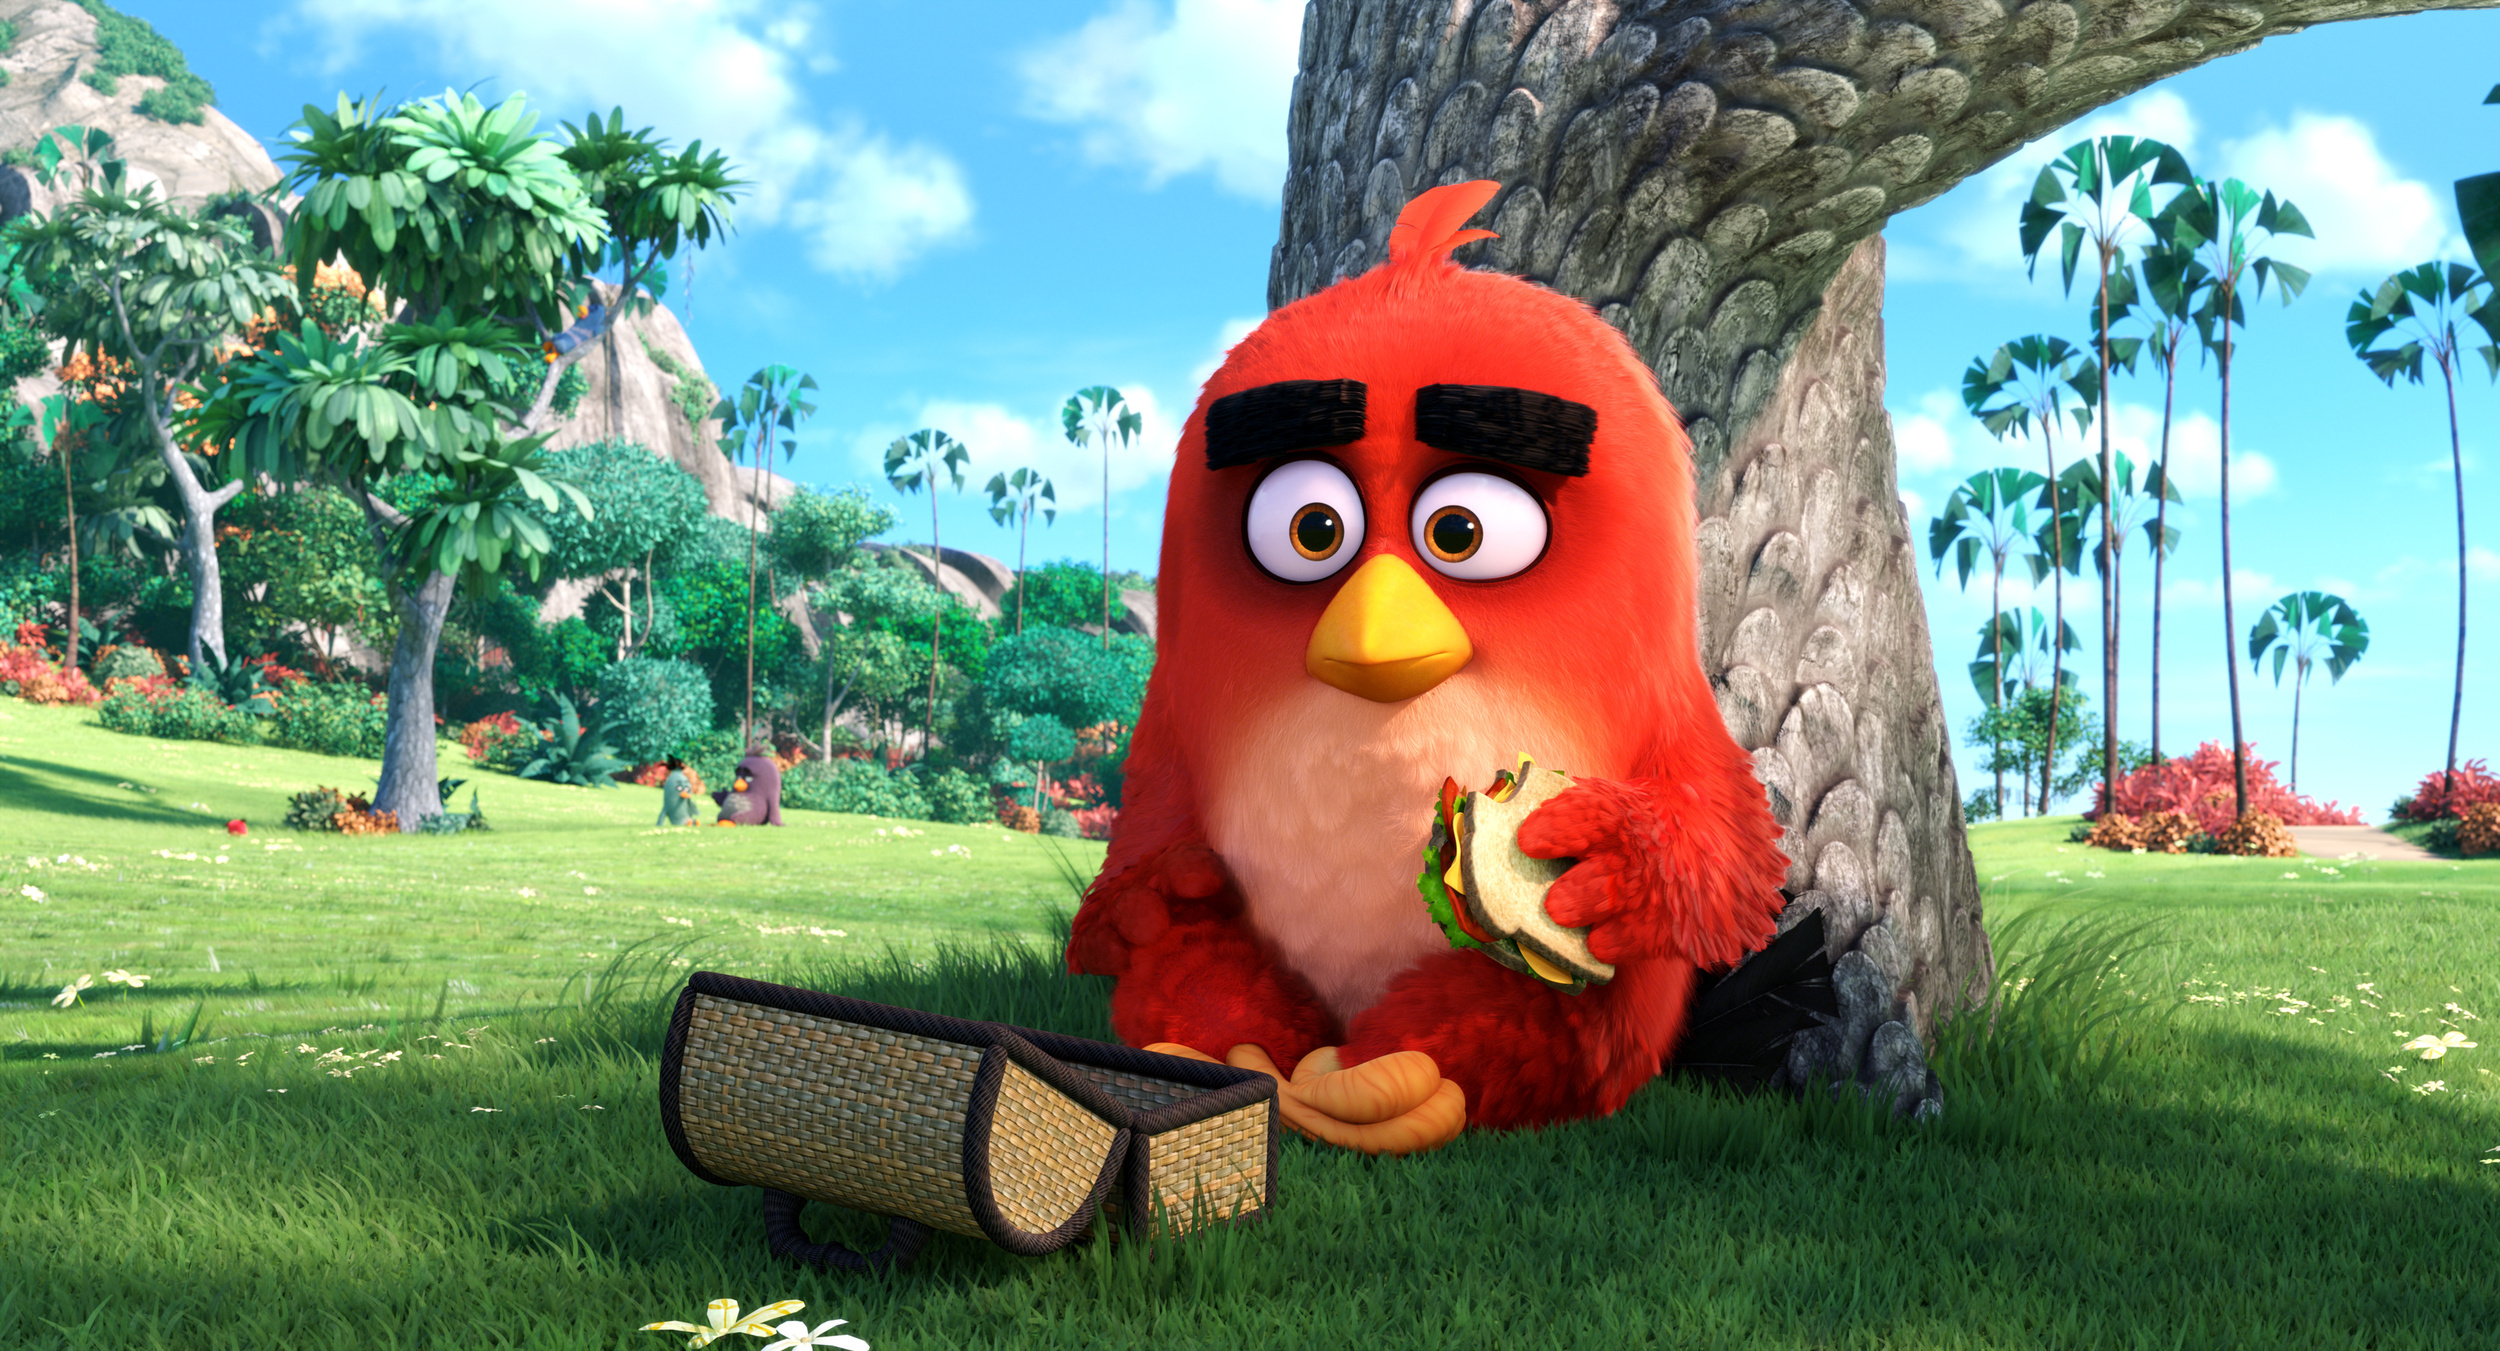 <p><span><em>Angry Birds</em> was a sensation when it came to mobile games, but could it translate into a movie? Let alone two movies? Yes, and yes. It proved that video game characters were a great concept for a kid's movie, and leading the helm of that ship was a truly, well, angry bird named Red.</span></p><p>You may also like: <a href='https://www.yardbarker.com/entertainment/articles/the_films_of_martin_scorsese_ranked_032724/s1__33857114'>The films of Martin Scorsese, ranked</a></p>